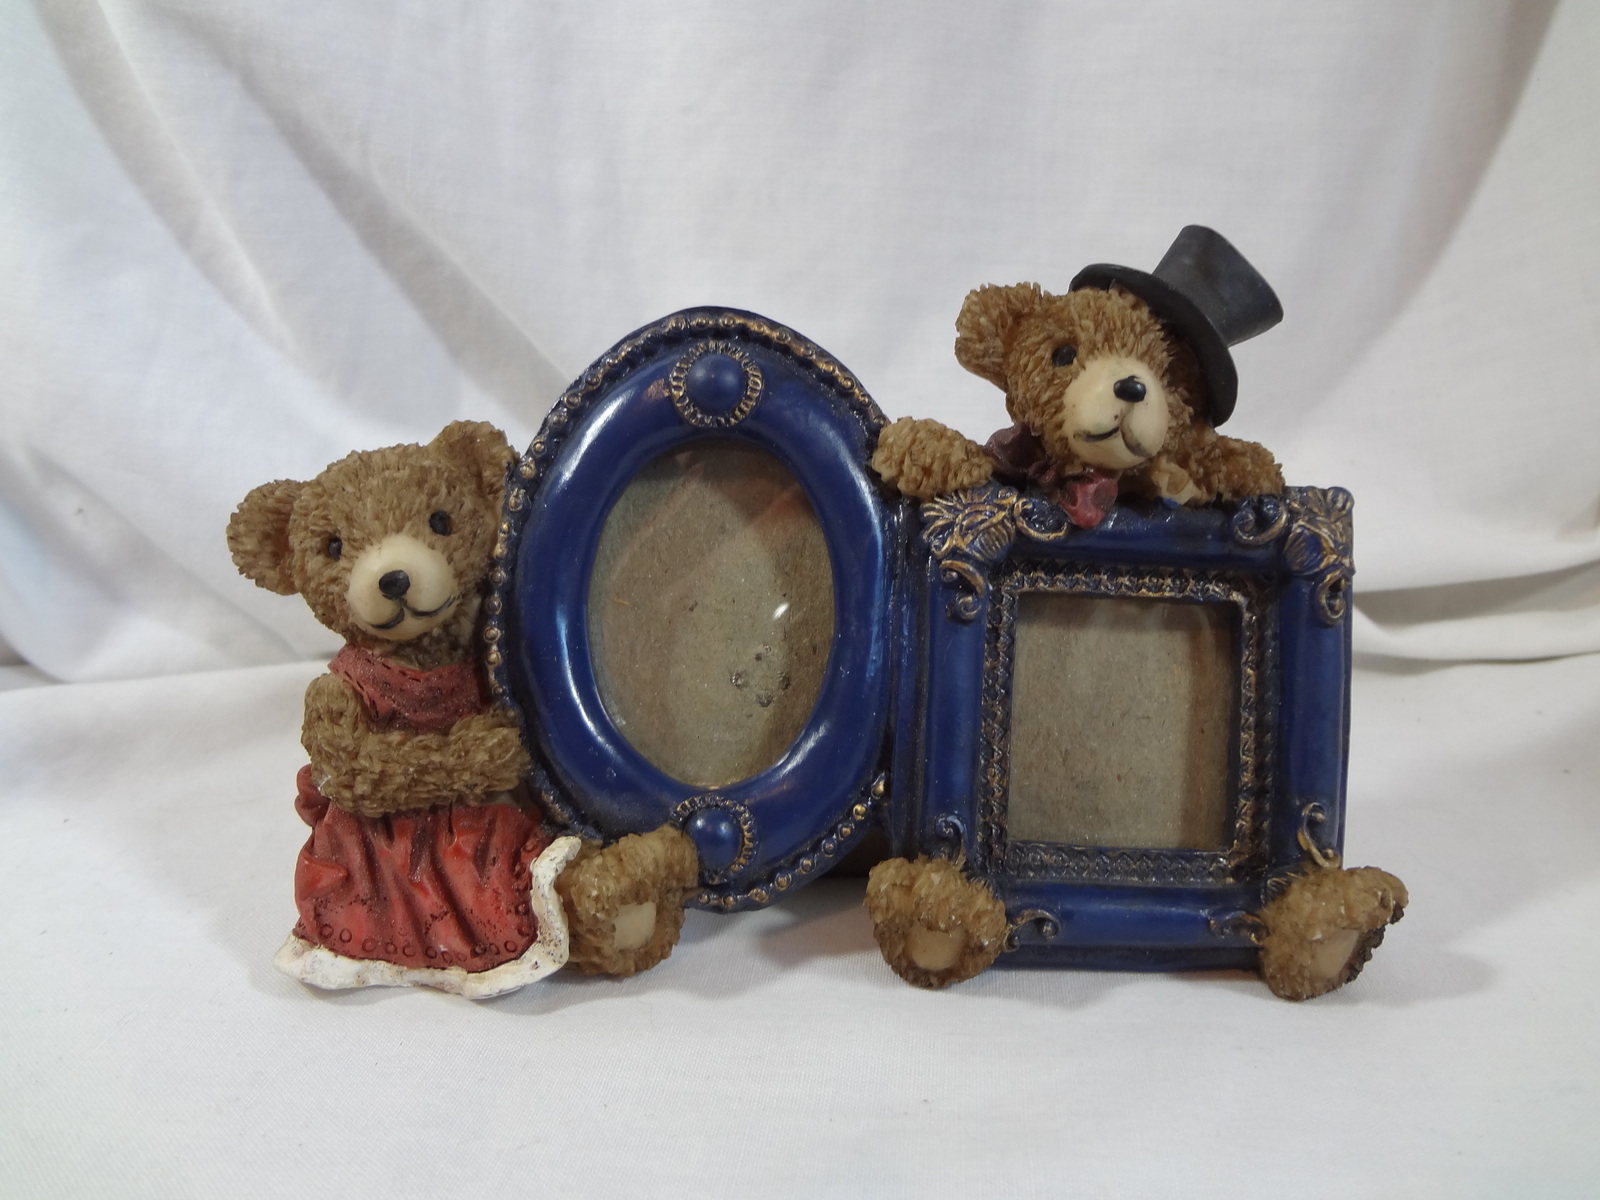 Teddy Bear Picture Photograph Frame Double Victorian Style Resin Free Standing - $1.99